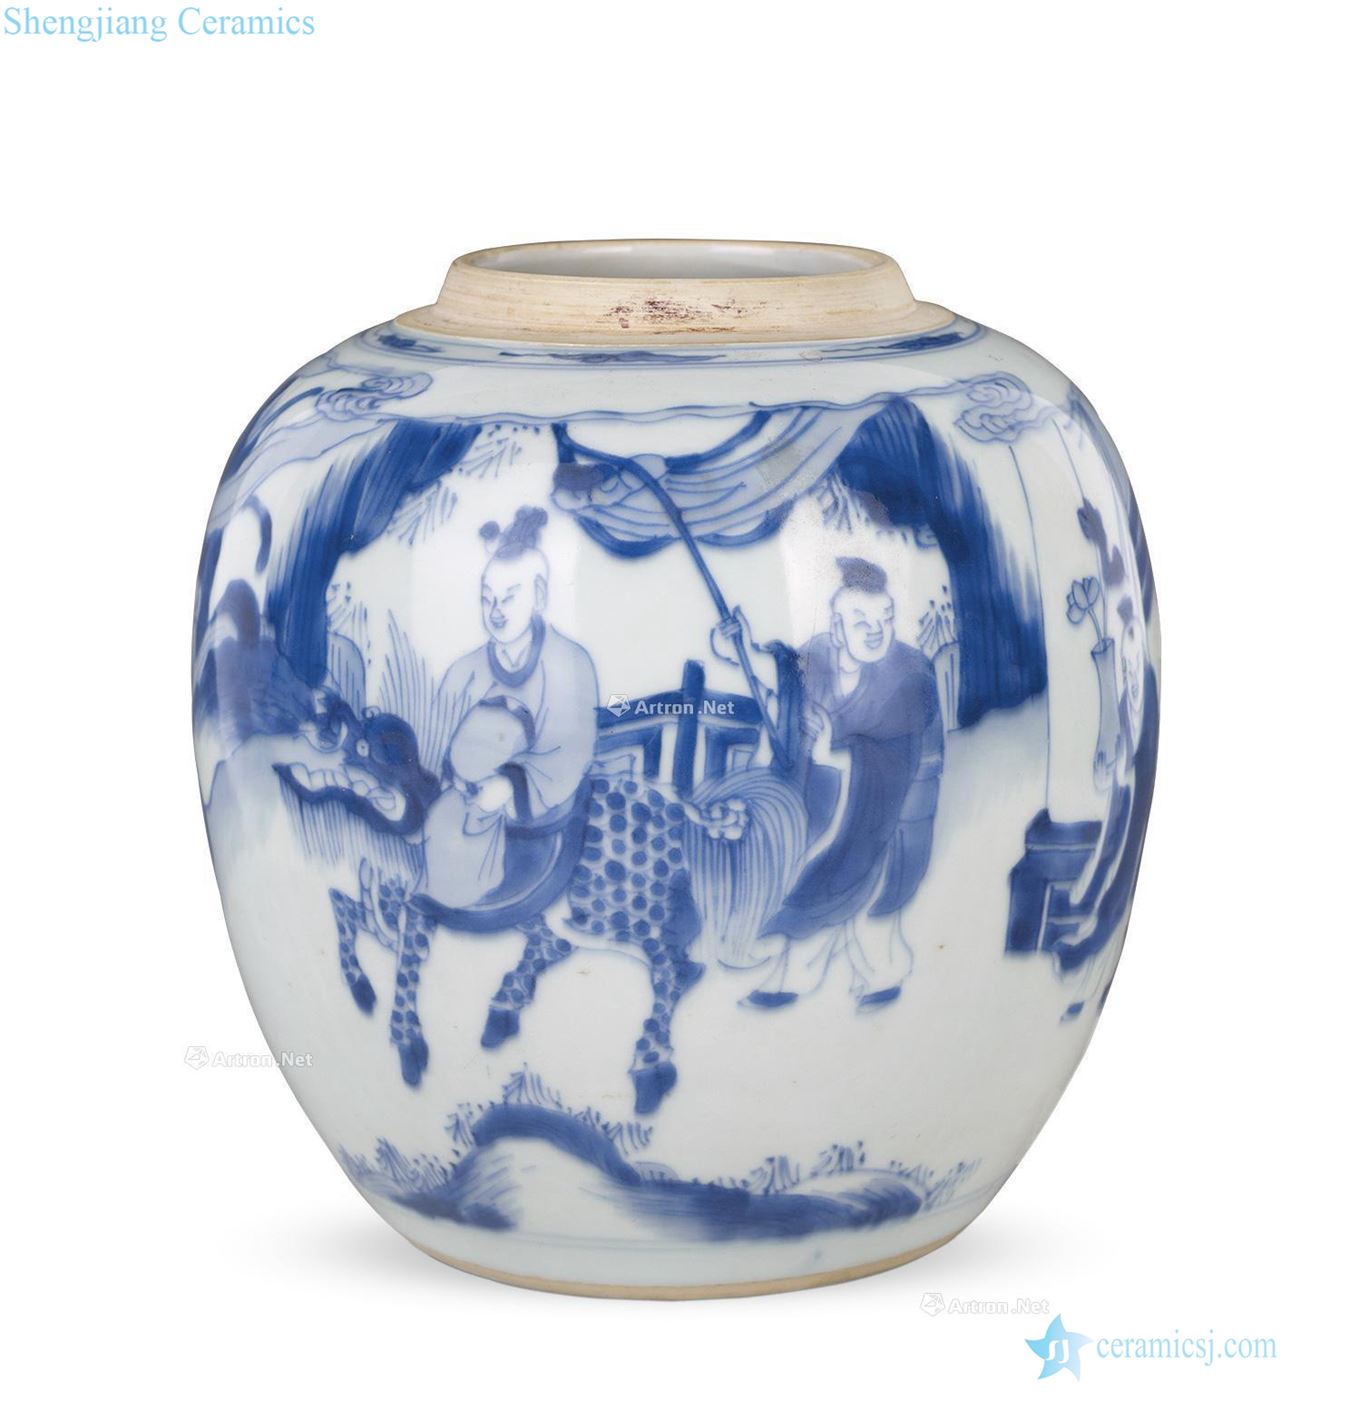 Kangxi champions parade grain canister